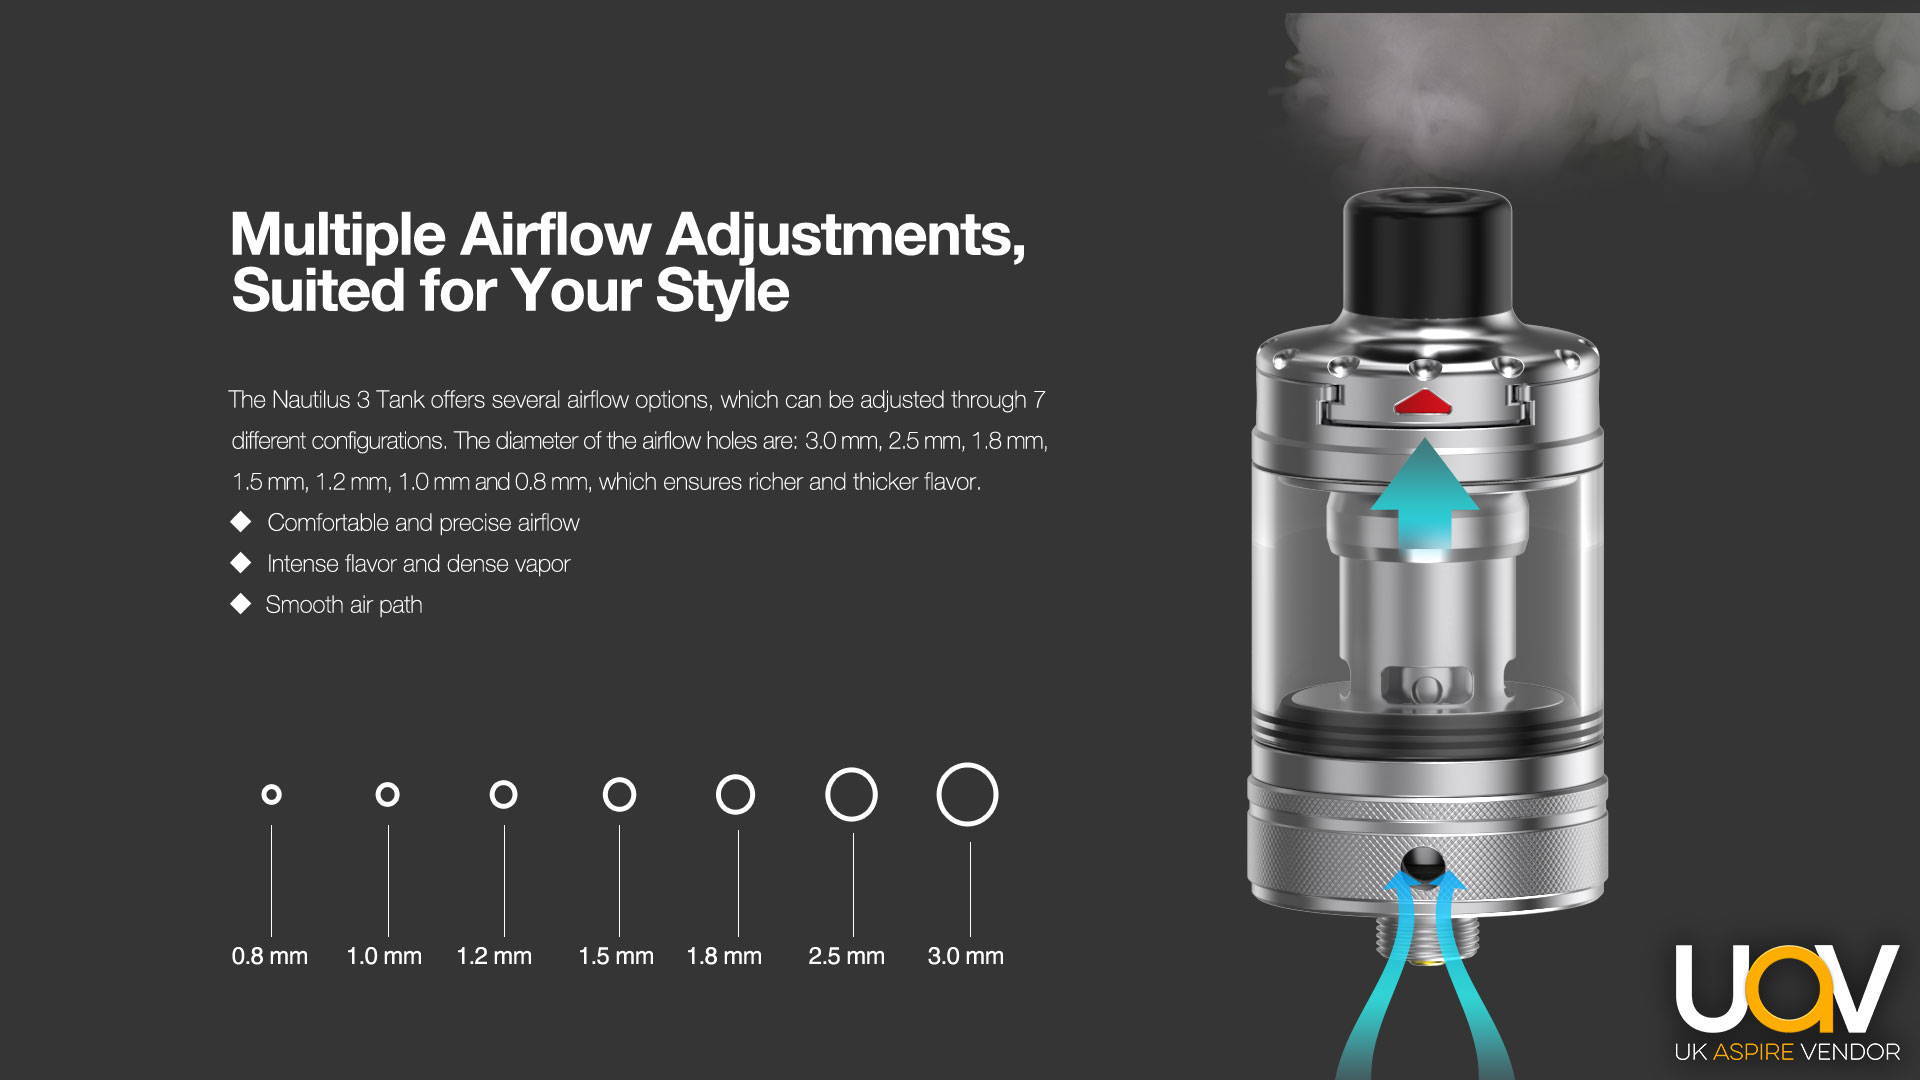 Multiple Airflow Adjustments, Suited for Your Style  The Nautilus 3 Tank offers several airflow options, which can be adjusted through 7 different configurations. The diameter of the airflow holes are: 3.0 mm, 2.5 mm, 1.8 mm, 1.5 mm, 1.2 mm, 1.0 mm and 0.8 mm, which ensures richer and thicker flavor. ◆	Comfortable and precise airflow  ◆	Intense flavor and dense vapor ◆  Smooth air path 